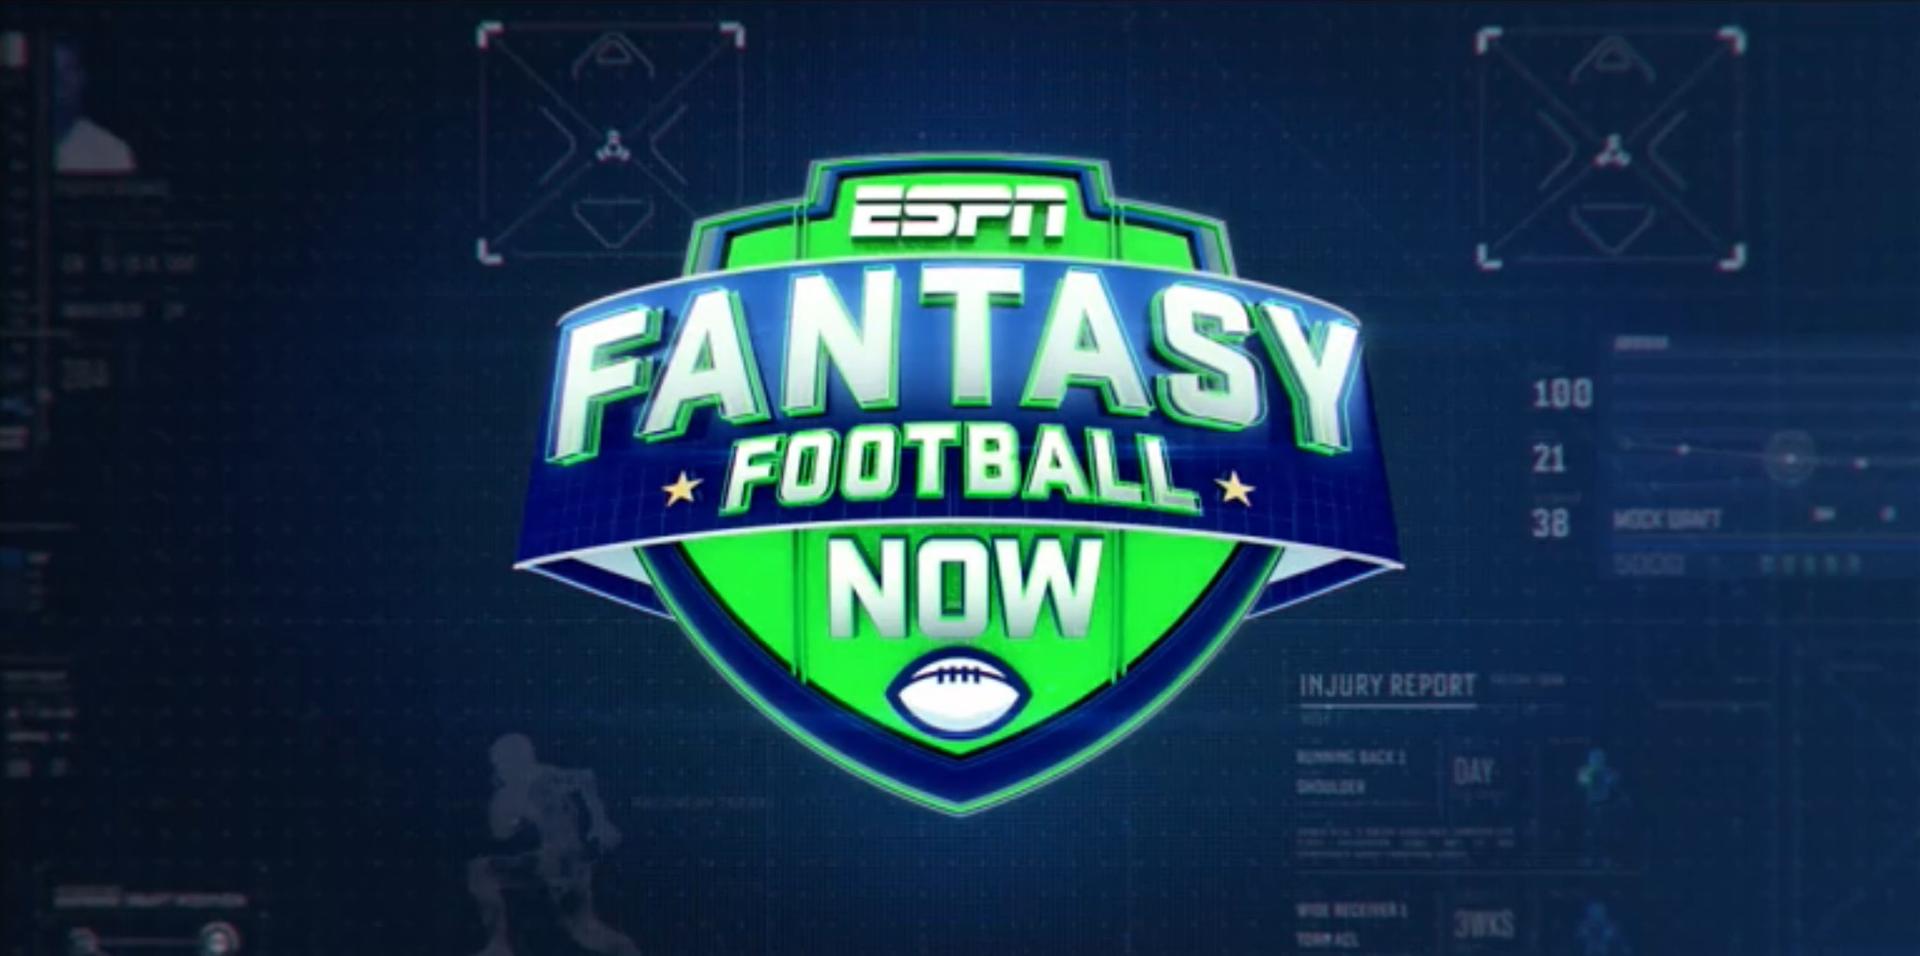 How To Leave Fantasy League ESPN?